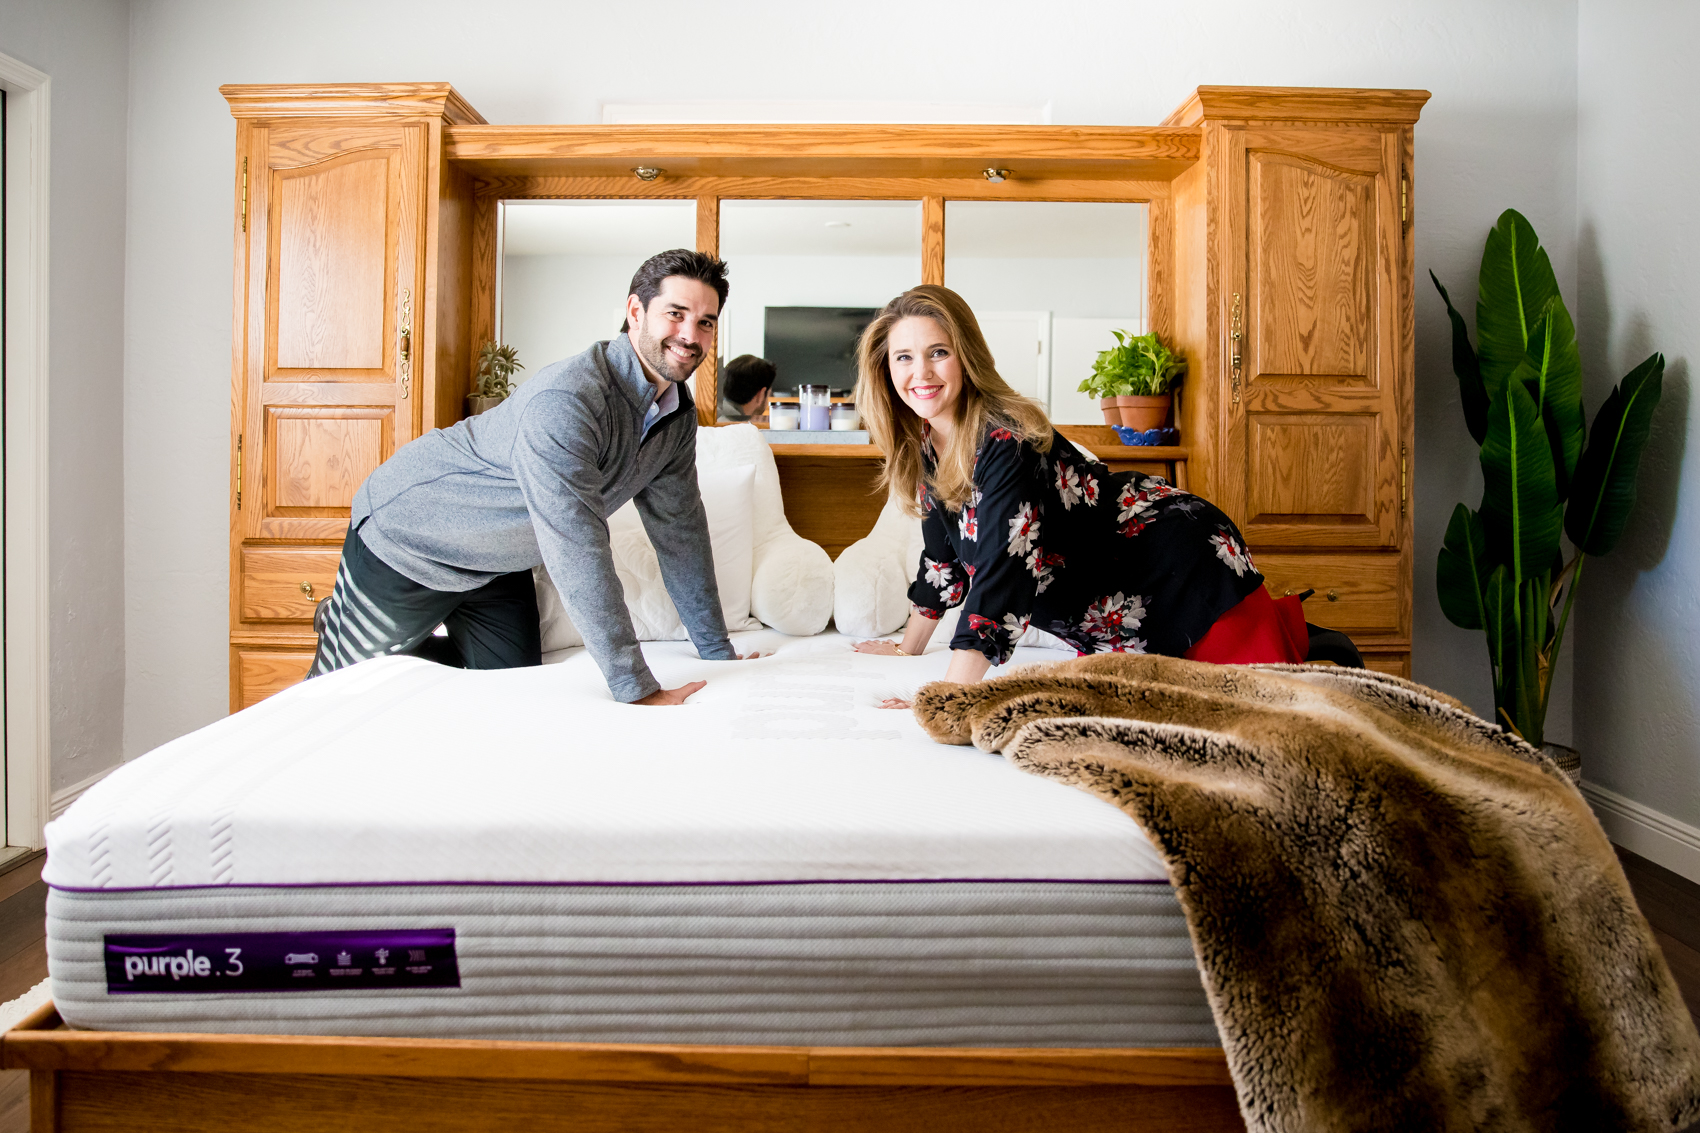 5 Reasons Everyone In The Family Needs A Purple® Bed